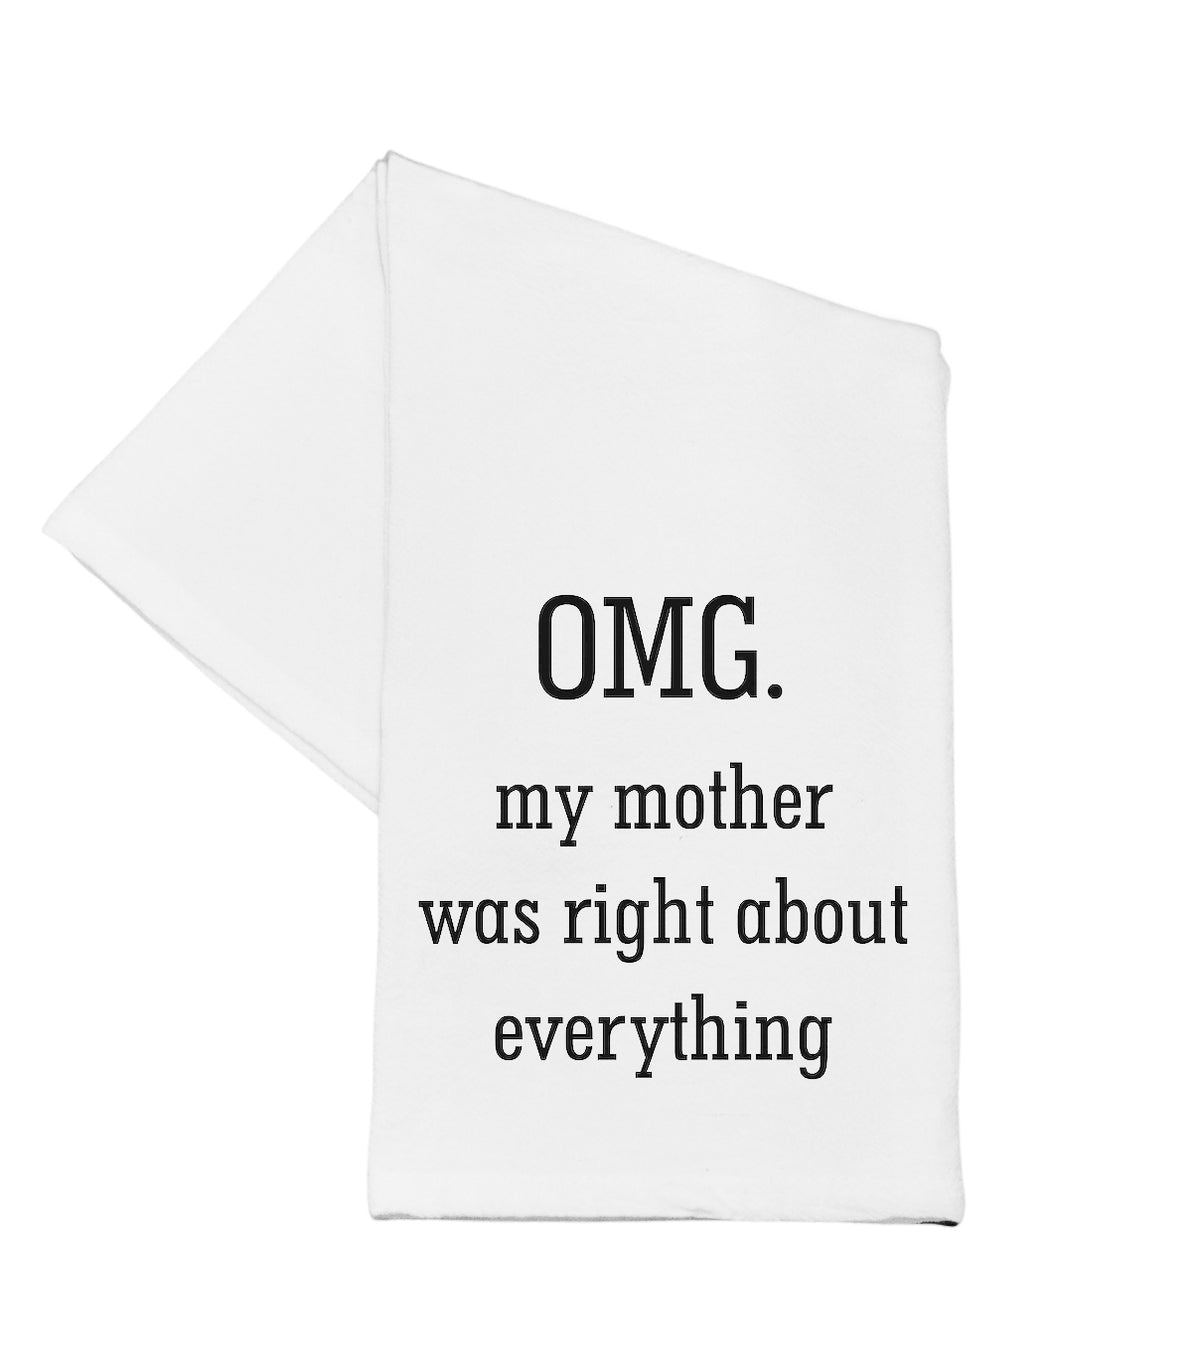 'OMG My Mother Was Right About Everything'- Cotton Tea Towel 16x24-OMG My Mother Was Right About Everything-Cali Moon Boutique, Plainville Connecticut